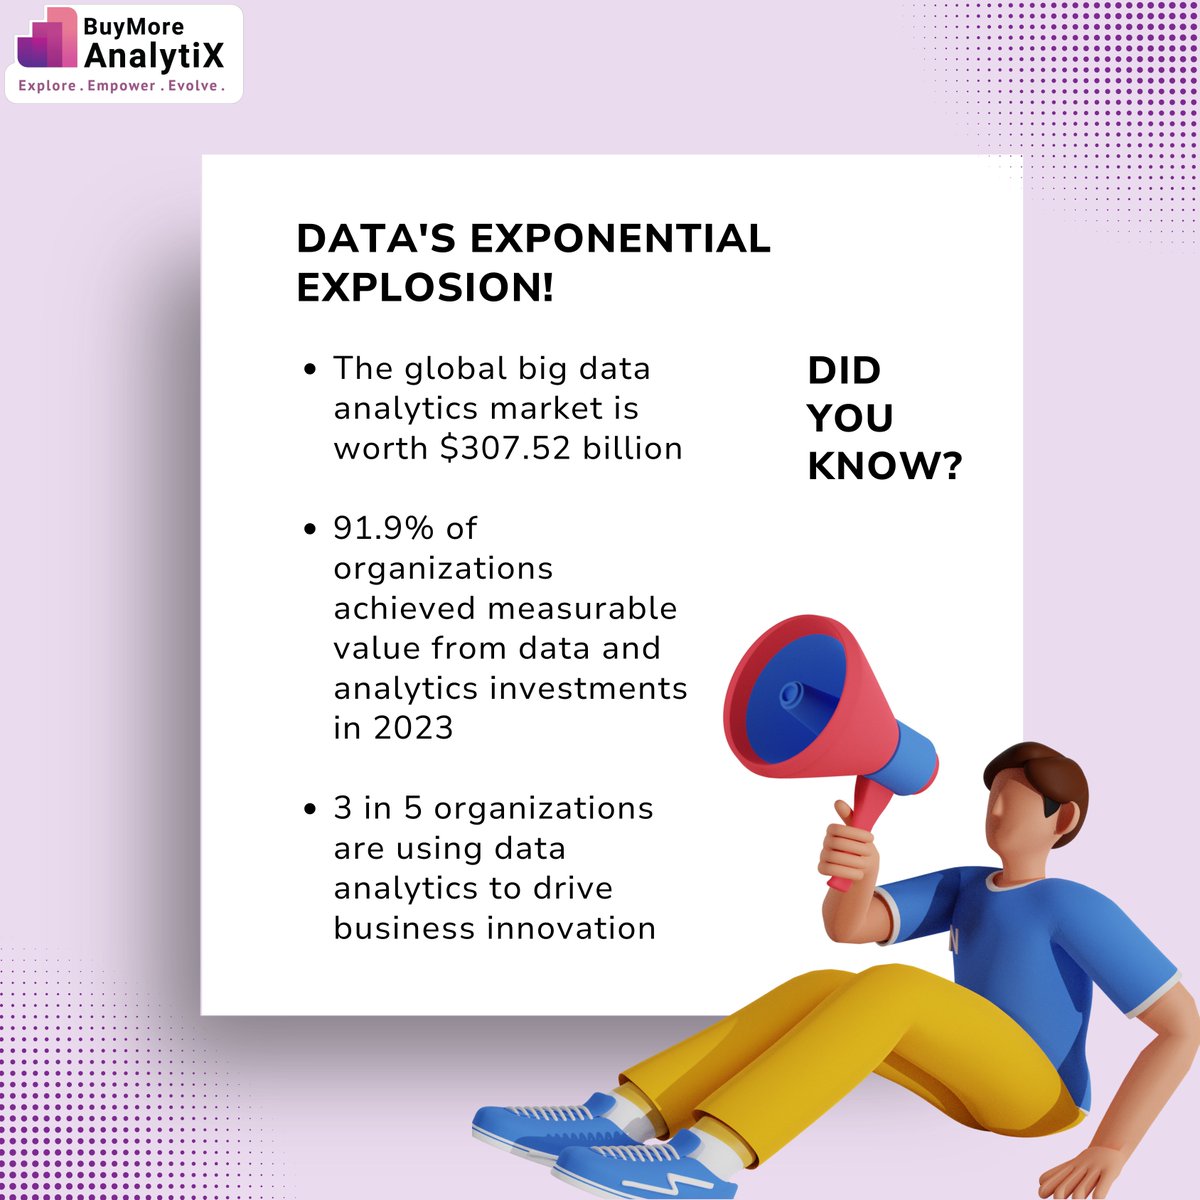 Let's uncover captivating #facts about the world of data analytics. Dive in with us! 🚀

#DataAnalytics #DataScience #BigData #AnalyticsMarket #Analytics #GlobalData #DataGrowth #DataScientists #DataAnalysts #BuymoreAnalytix